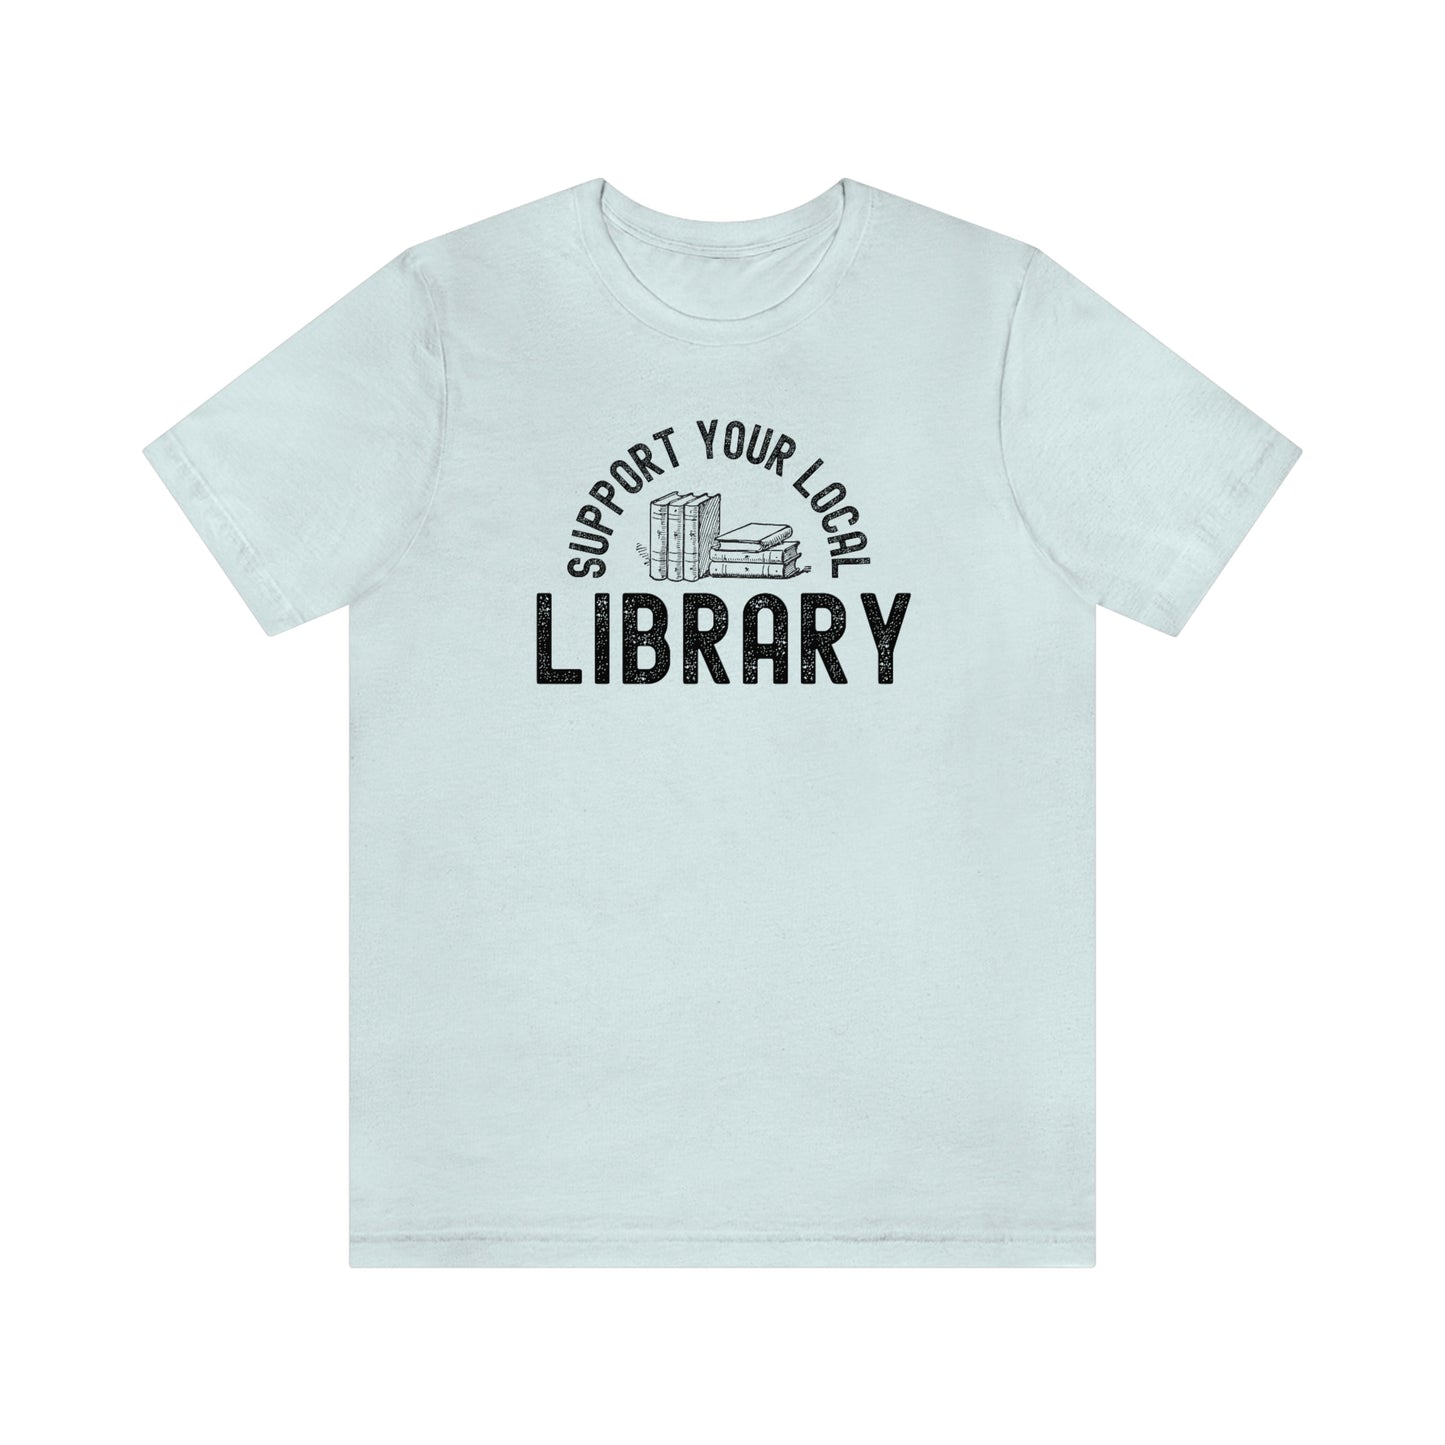 Support Your Local Library Shirt